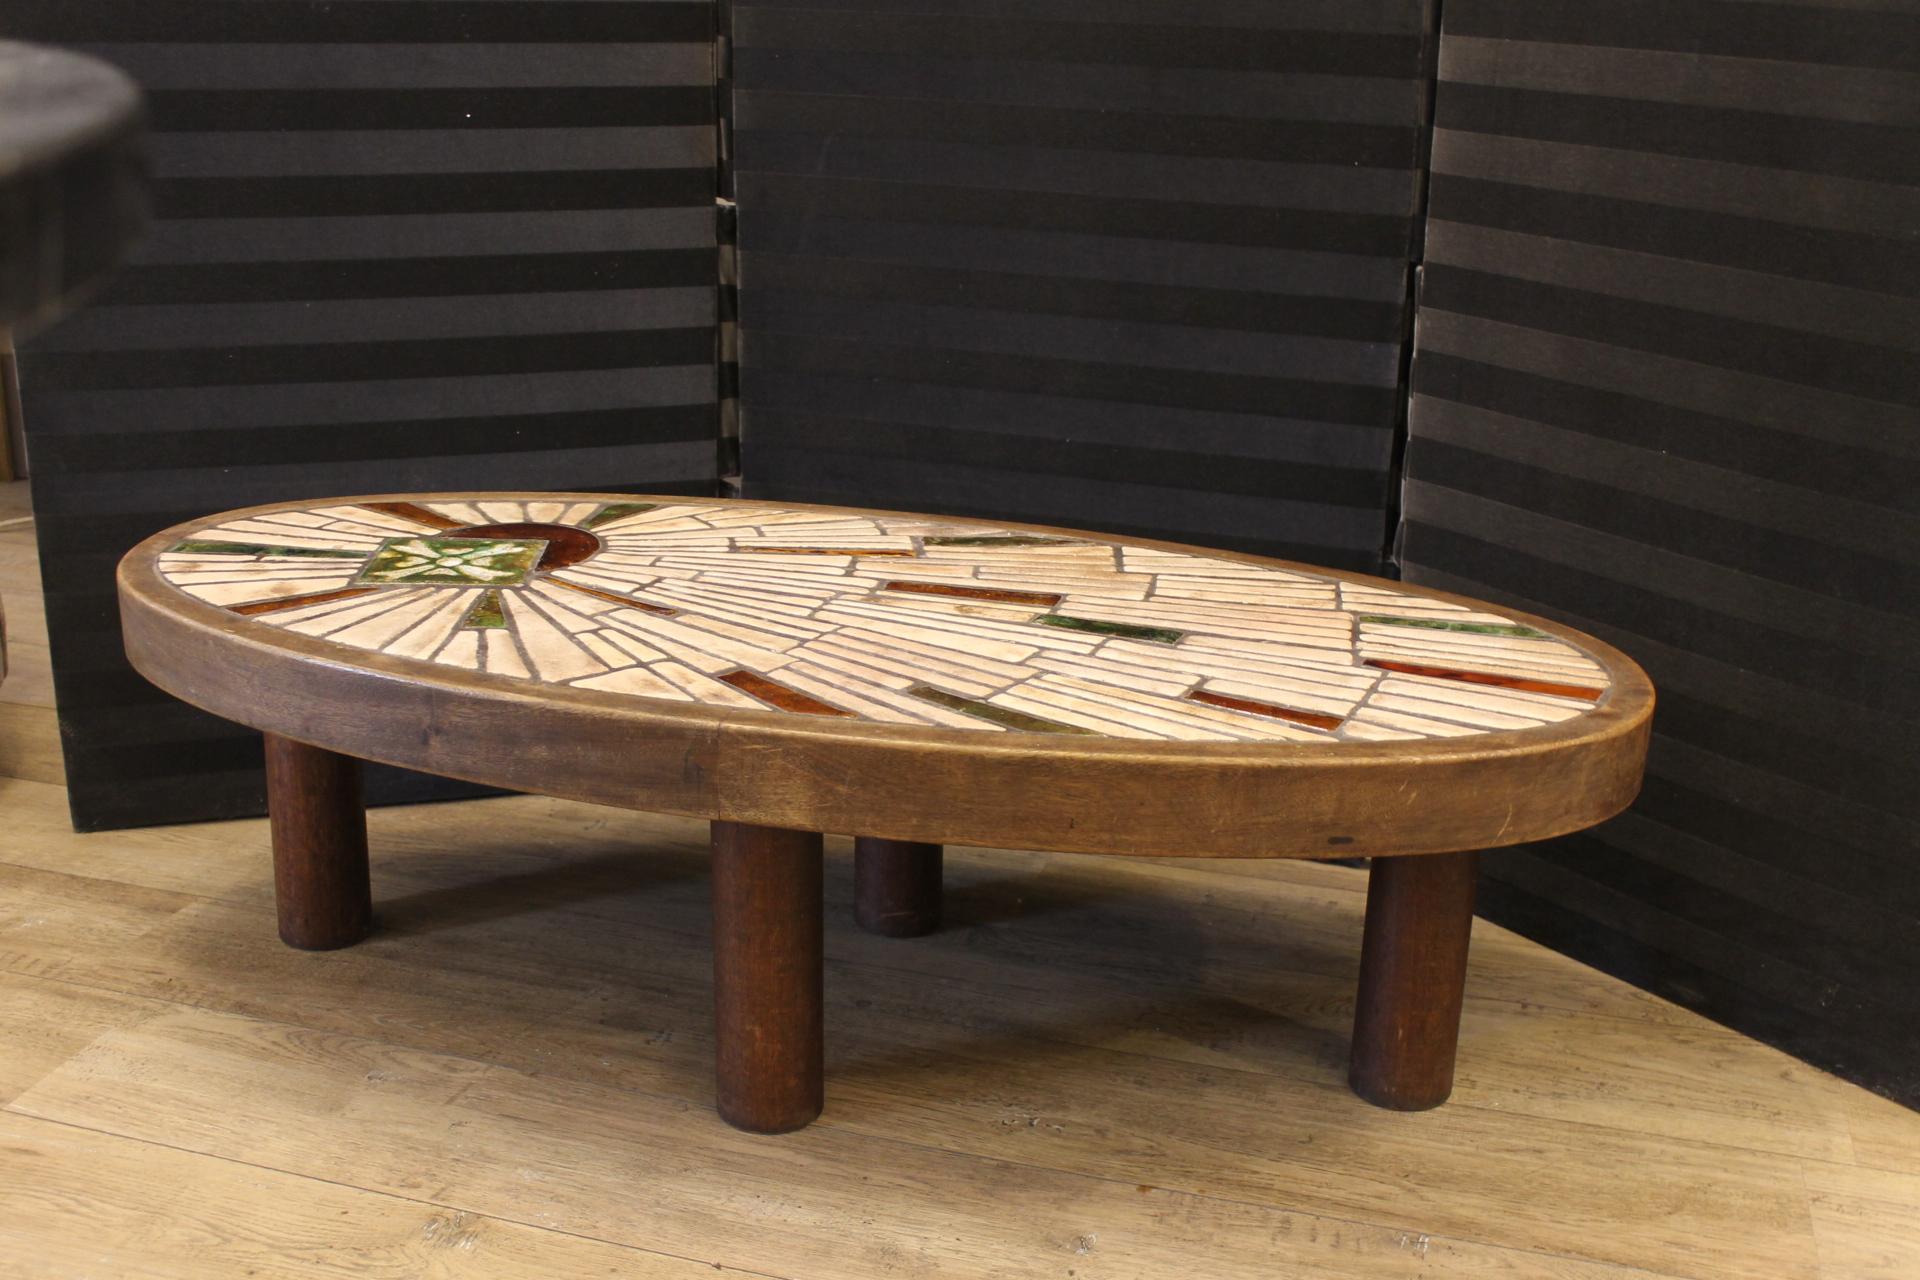 Oval coffee table in beige, red and green colored ceramic tiles, made in the 1950s. Structure in dark wood.
In the style of Caperon, Vallauris.
Of good quality in good condition.
No broken tiles.